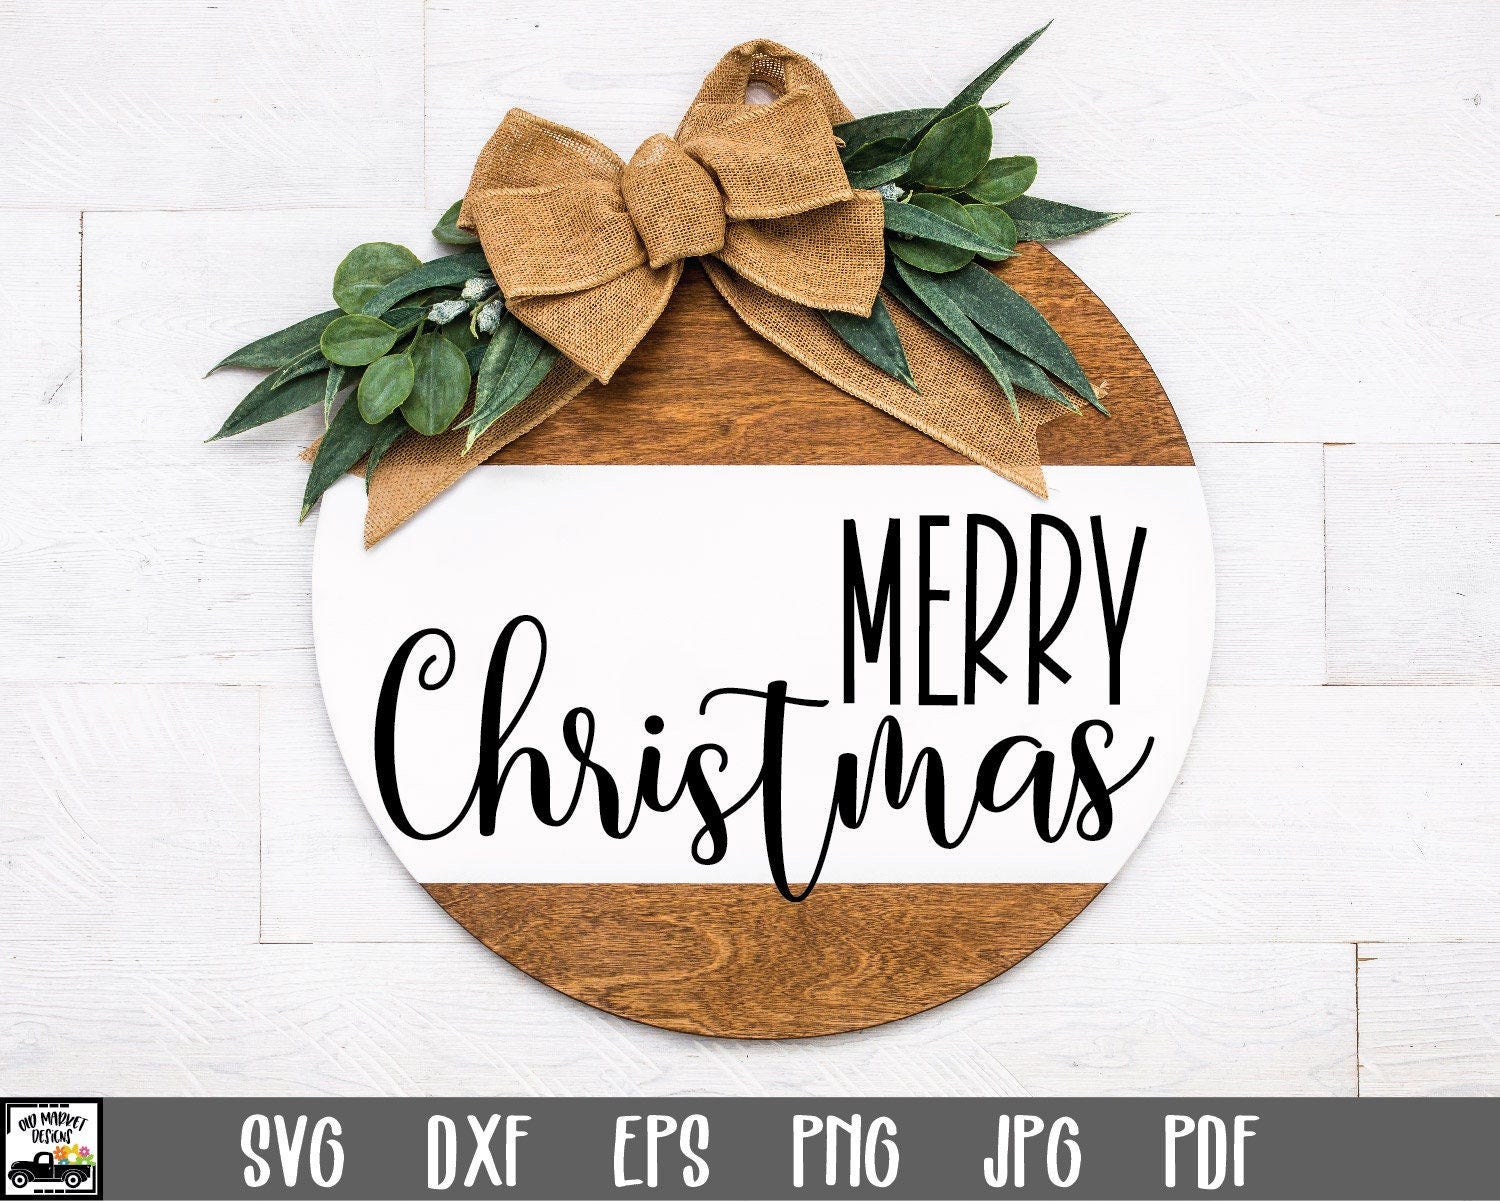 Merry Christmas SVG File - Round Christmas Sign - Christmas SVG File - Clip Art -Cutting Files - Christmas Ornament Cut File - Sublimation